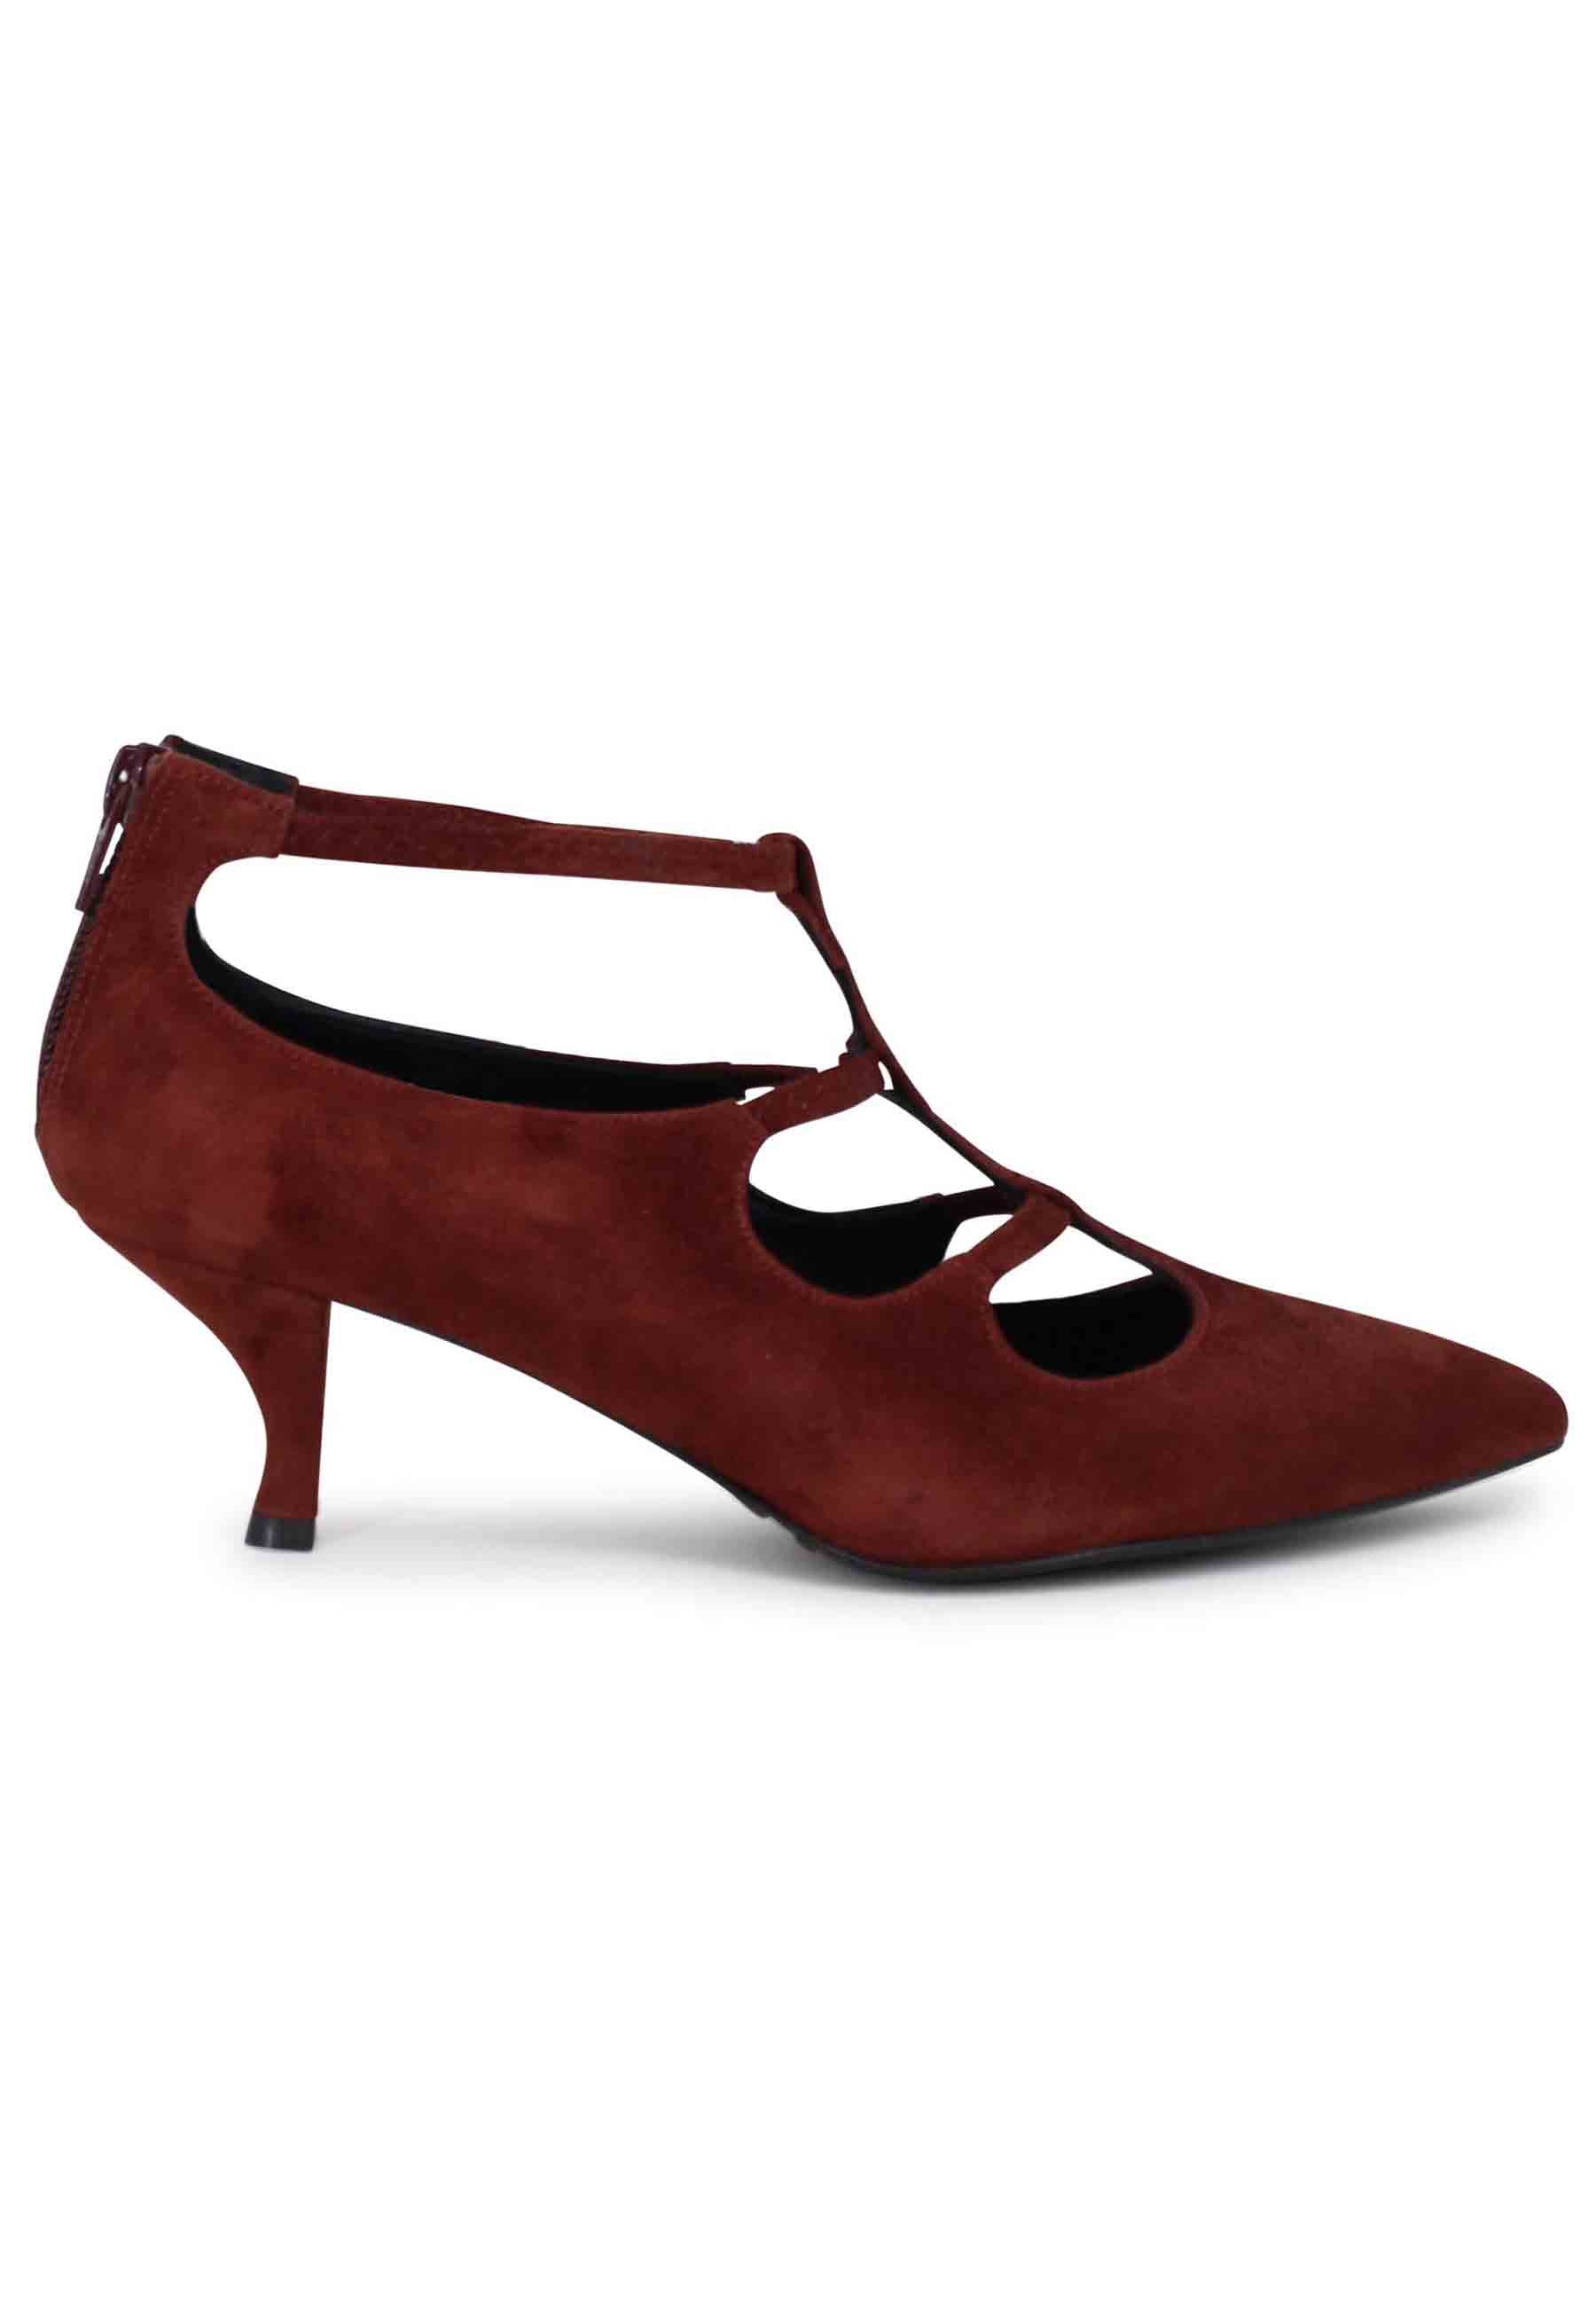 Women's decollete in brown suede with straps